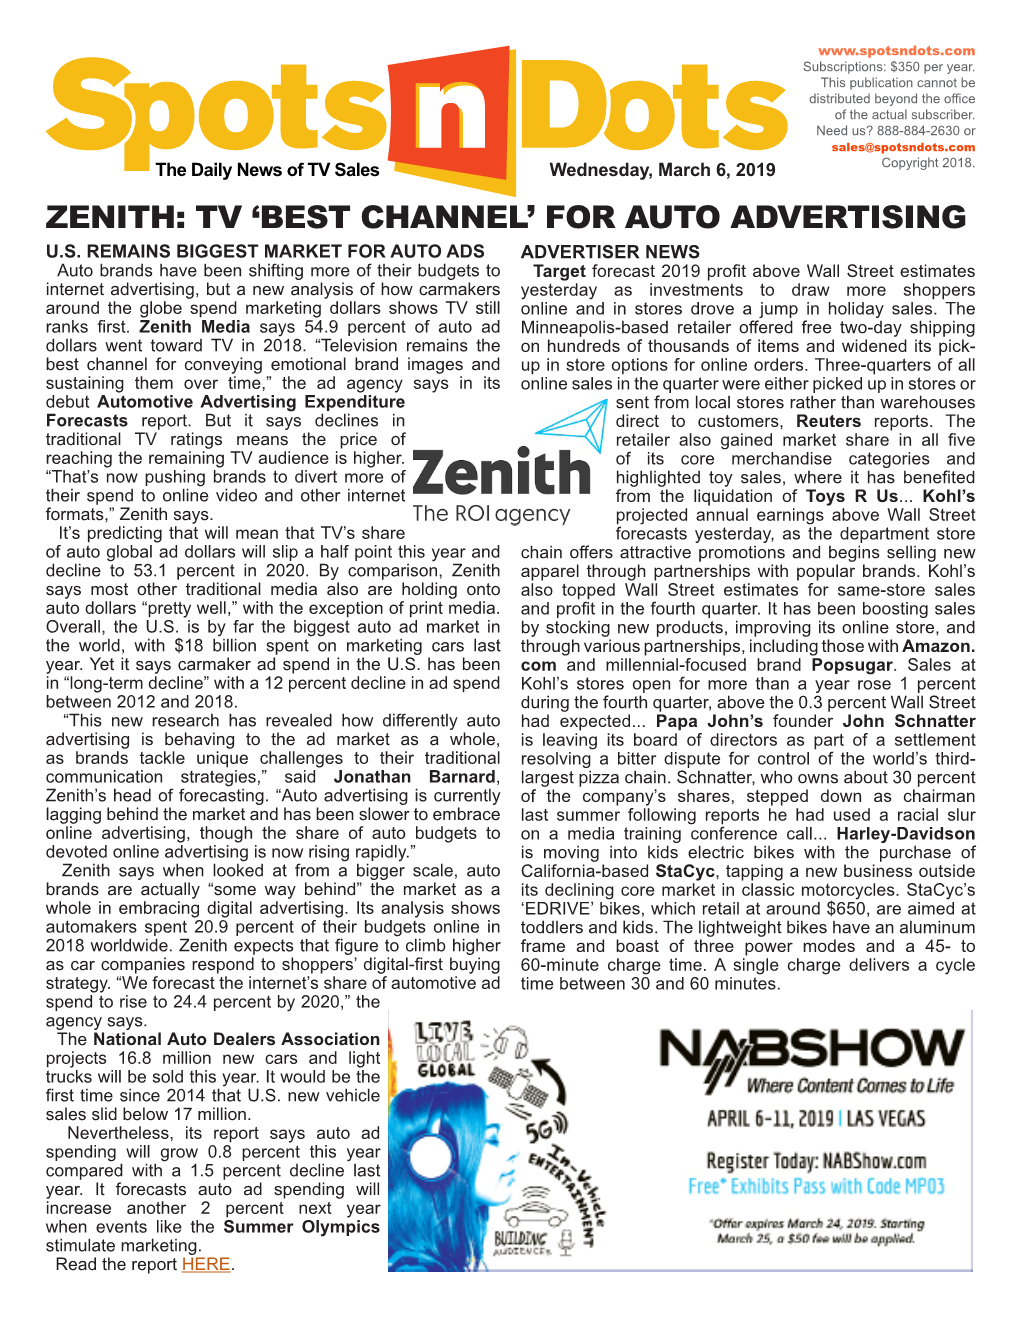 Zenith: Tv 'Best Channel' for Auto Advertising